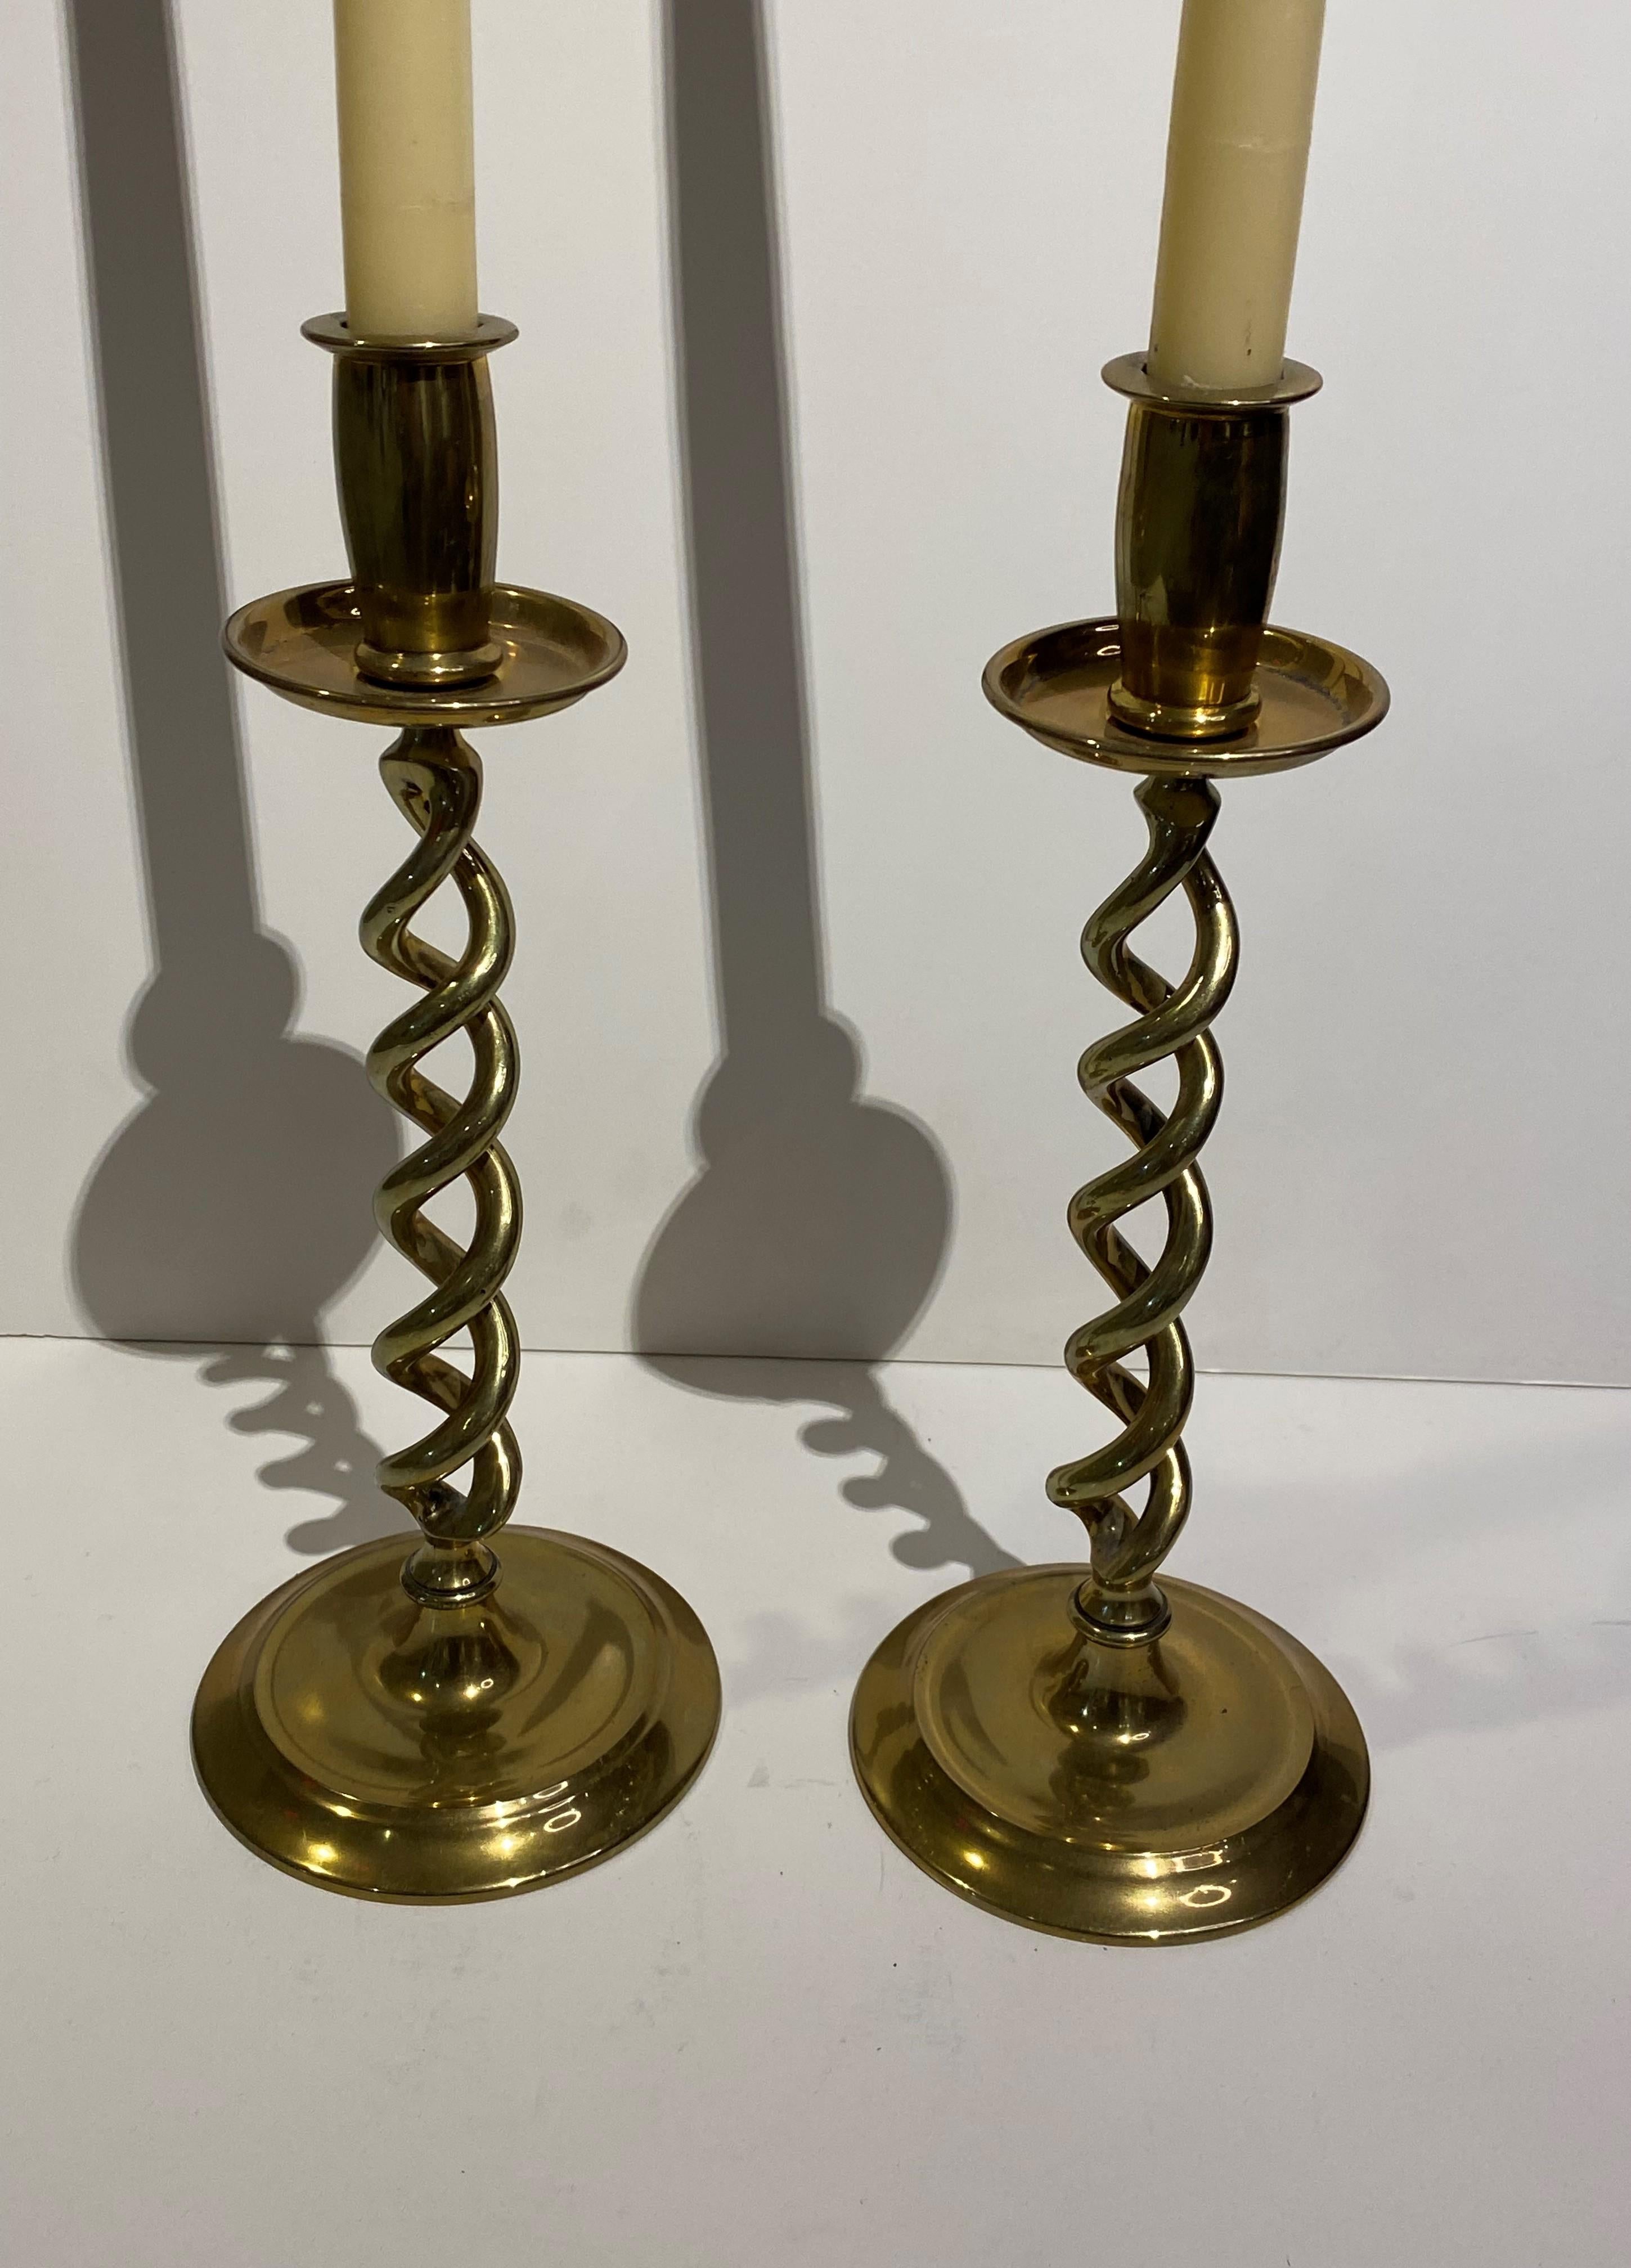 Add romance to your holiday table with a lovely pair of 19th century solid brass open twist candlesticks from England.
Circa 1880.